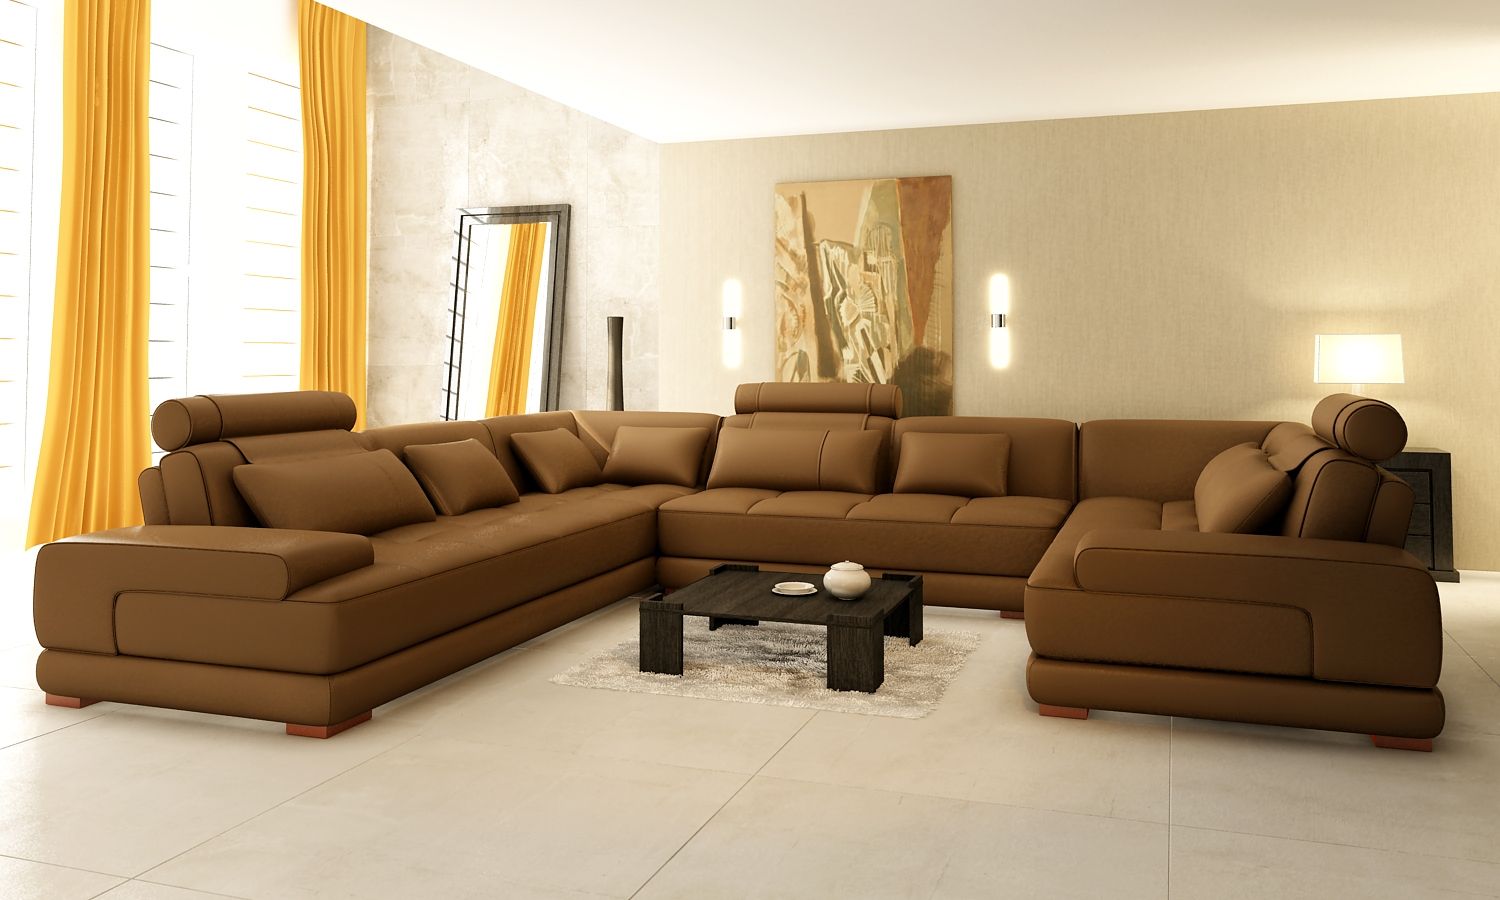 Expensive Sectional Sofas Hereo Sofa In Expensive Sectional Sofas (View 3 of 12)